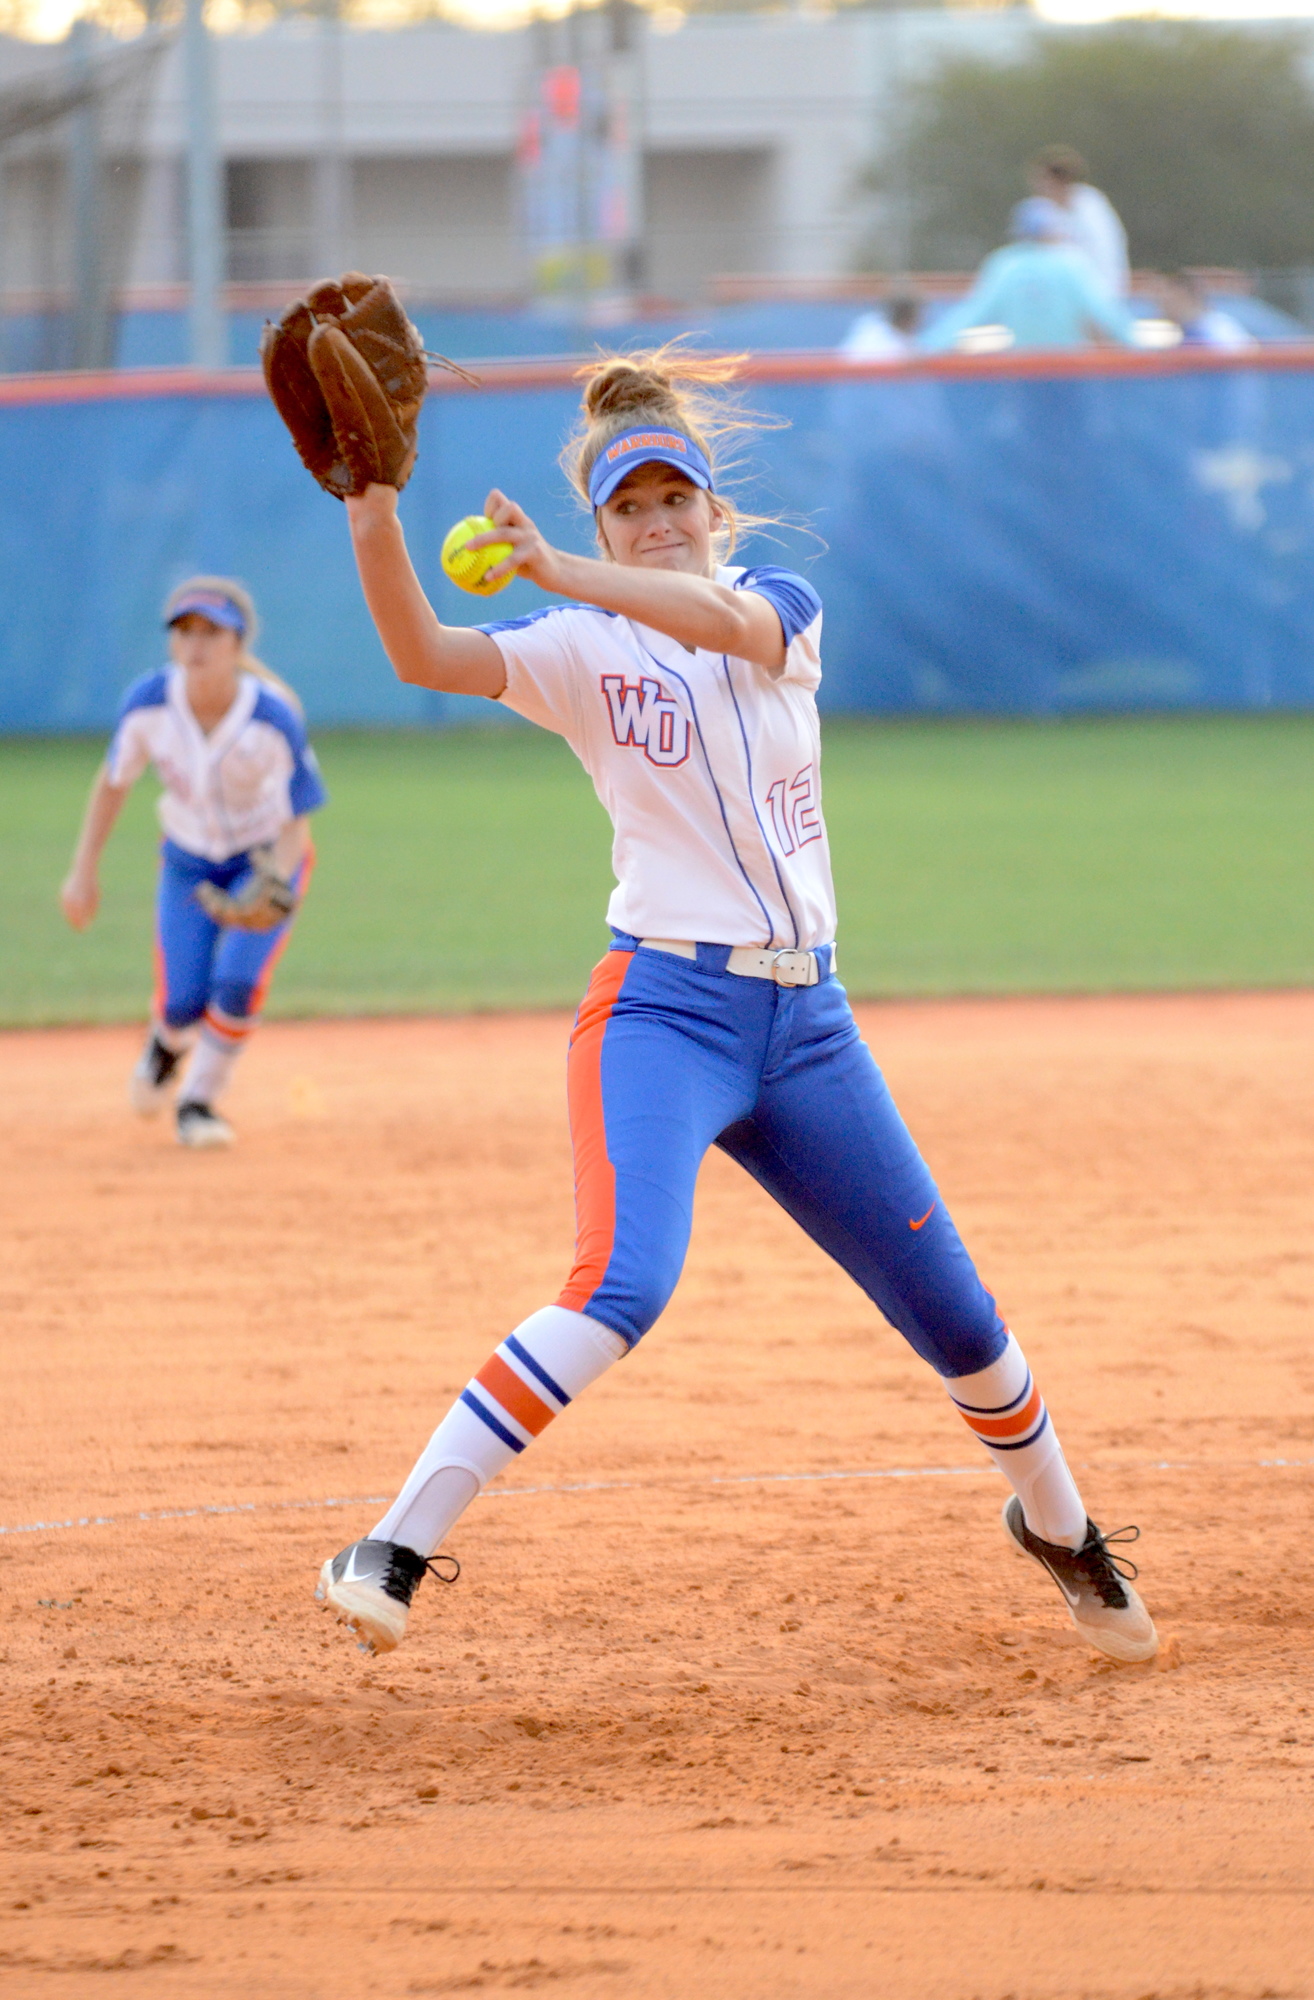 Landry Newgent earned the complete-game victory for West Orange in extra-innings. Archive photo